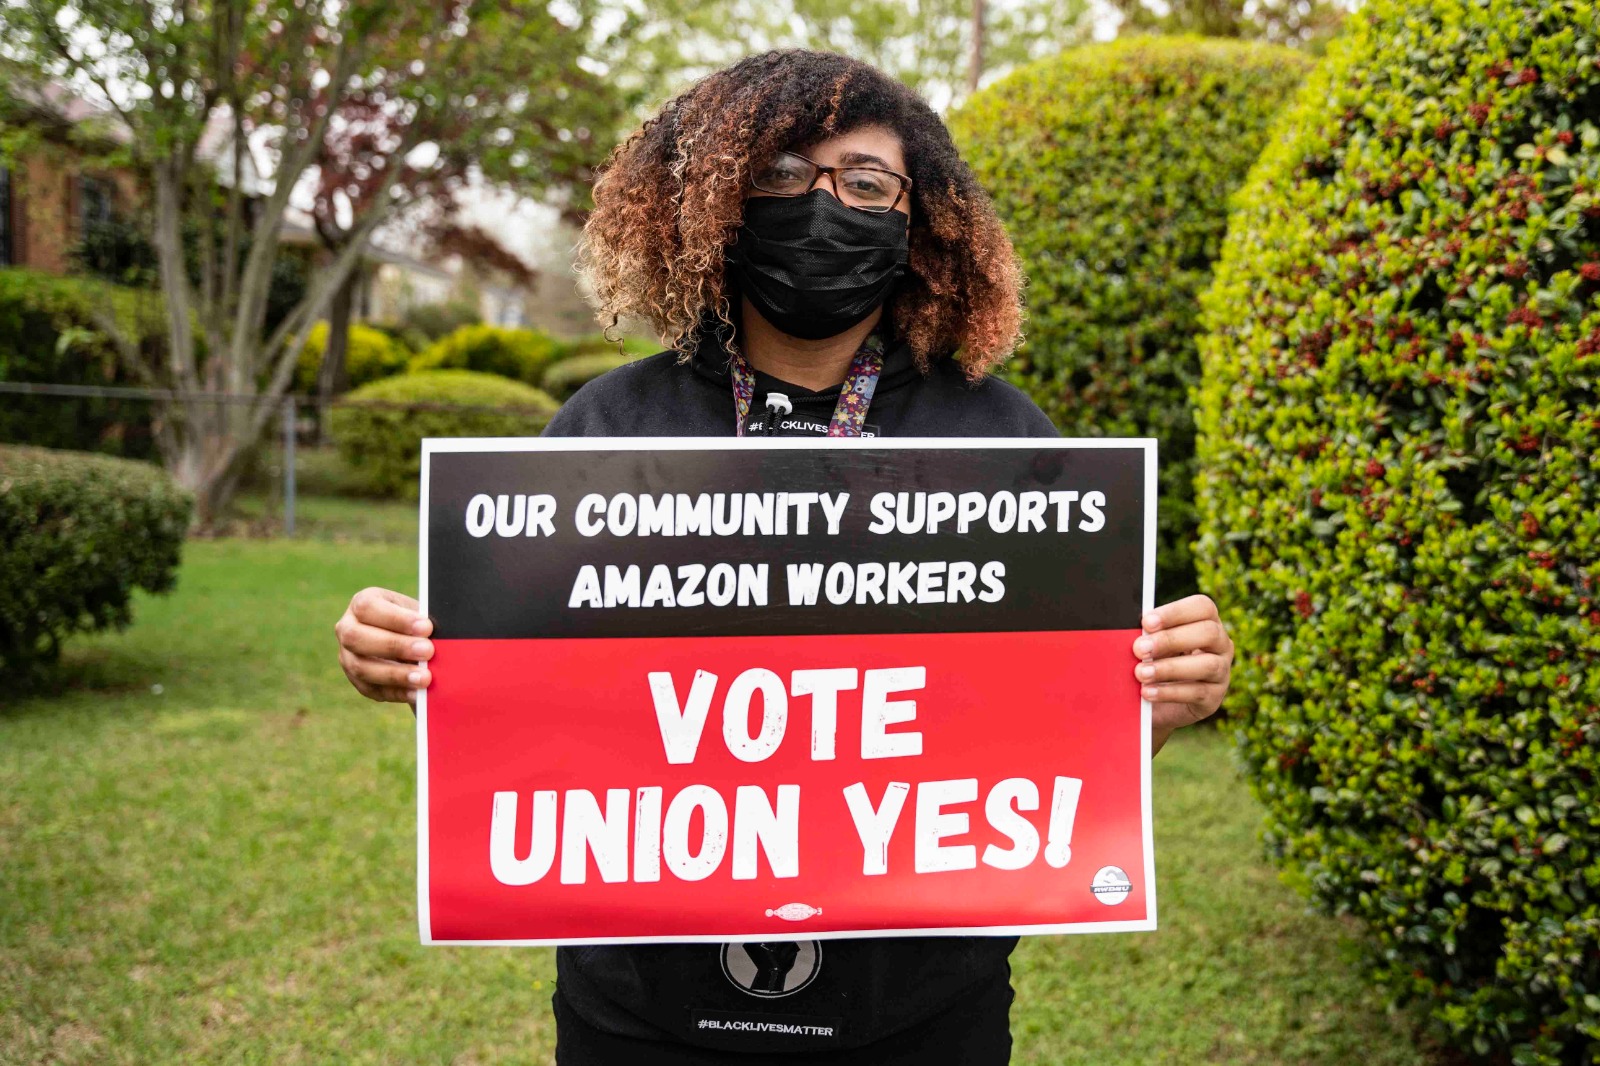 Frances Wallace, a Black woman wearing glasses and a plan black mask, holds a sign that says "Our Community Supports Amazon Workers: Vote Union Yes!"